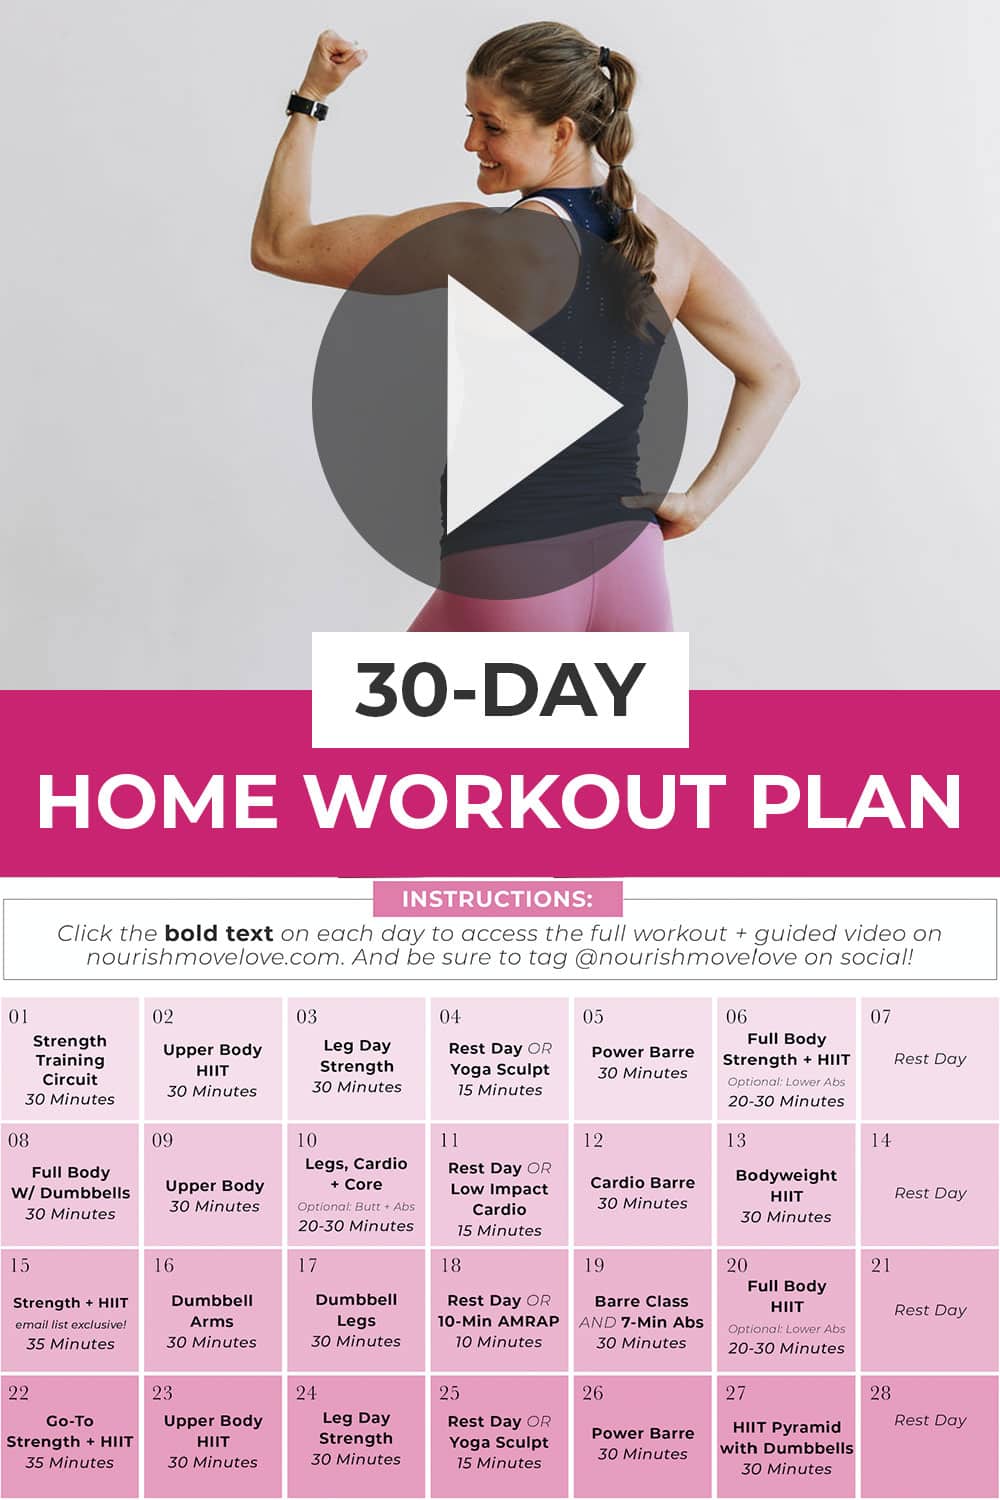 Home workout routines for a fit lifestyle